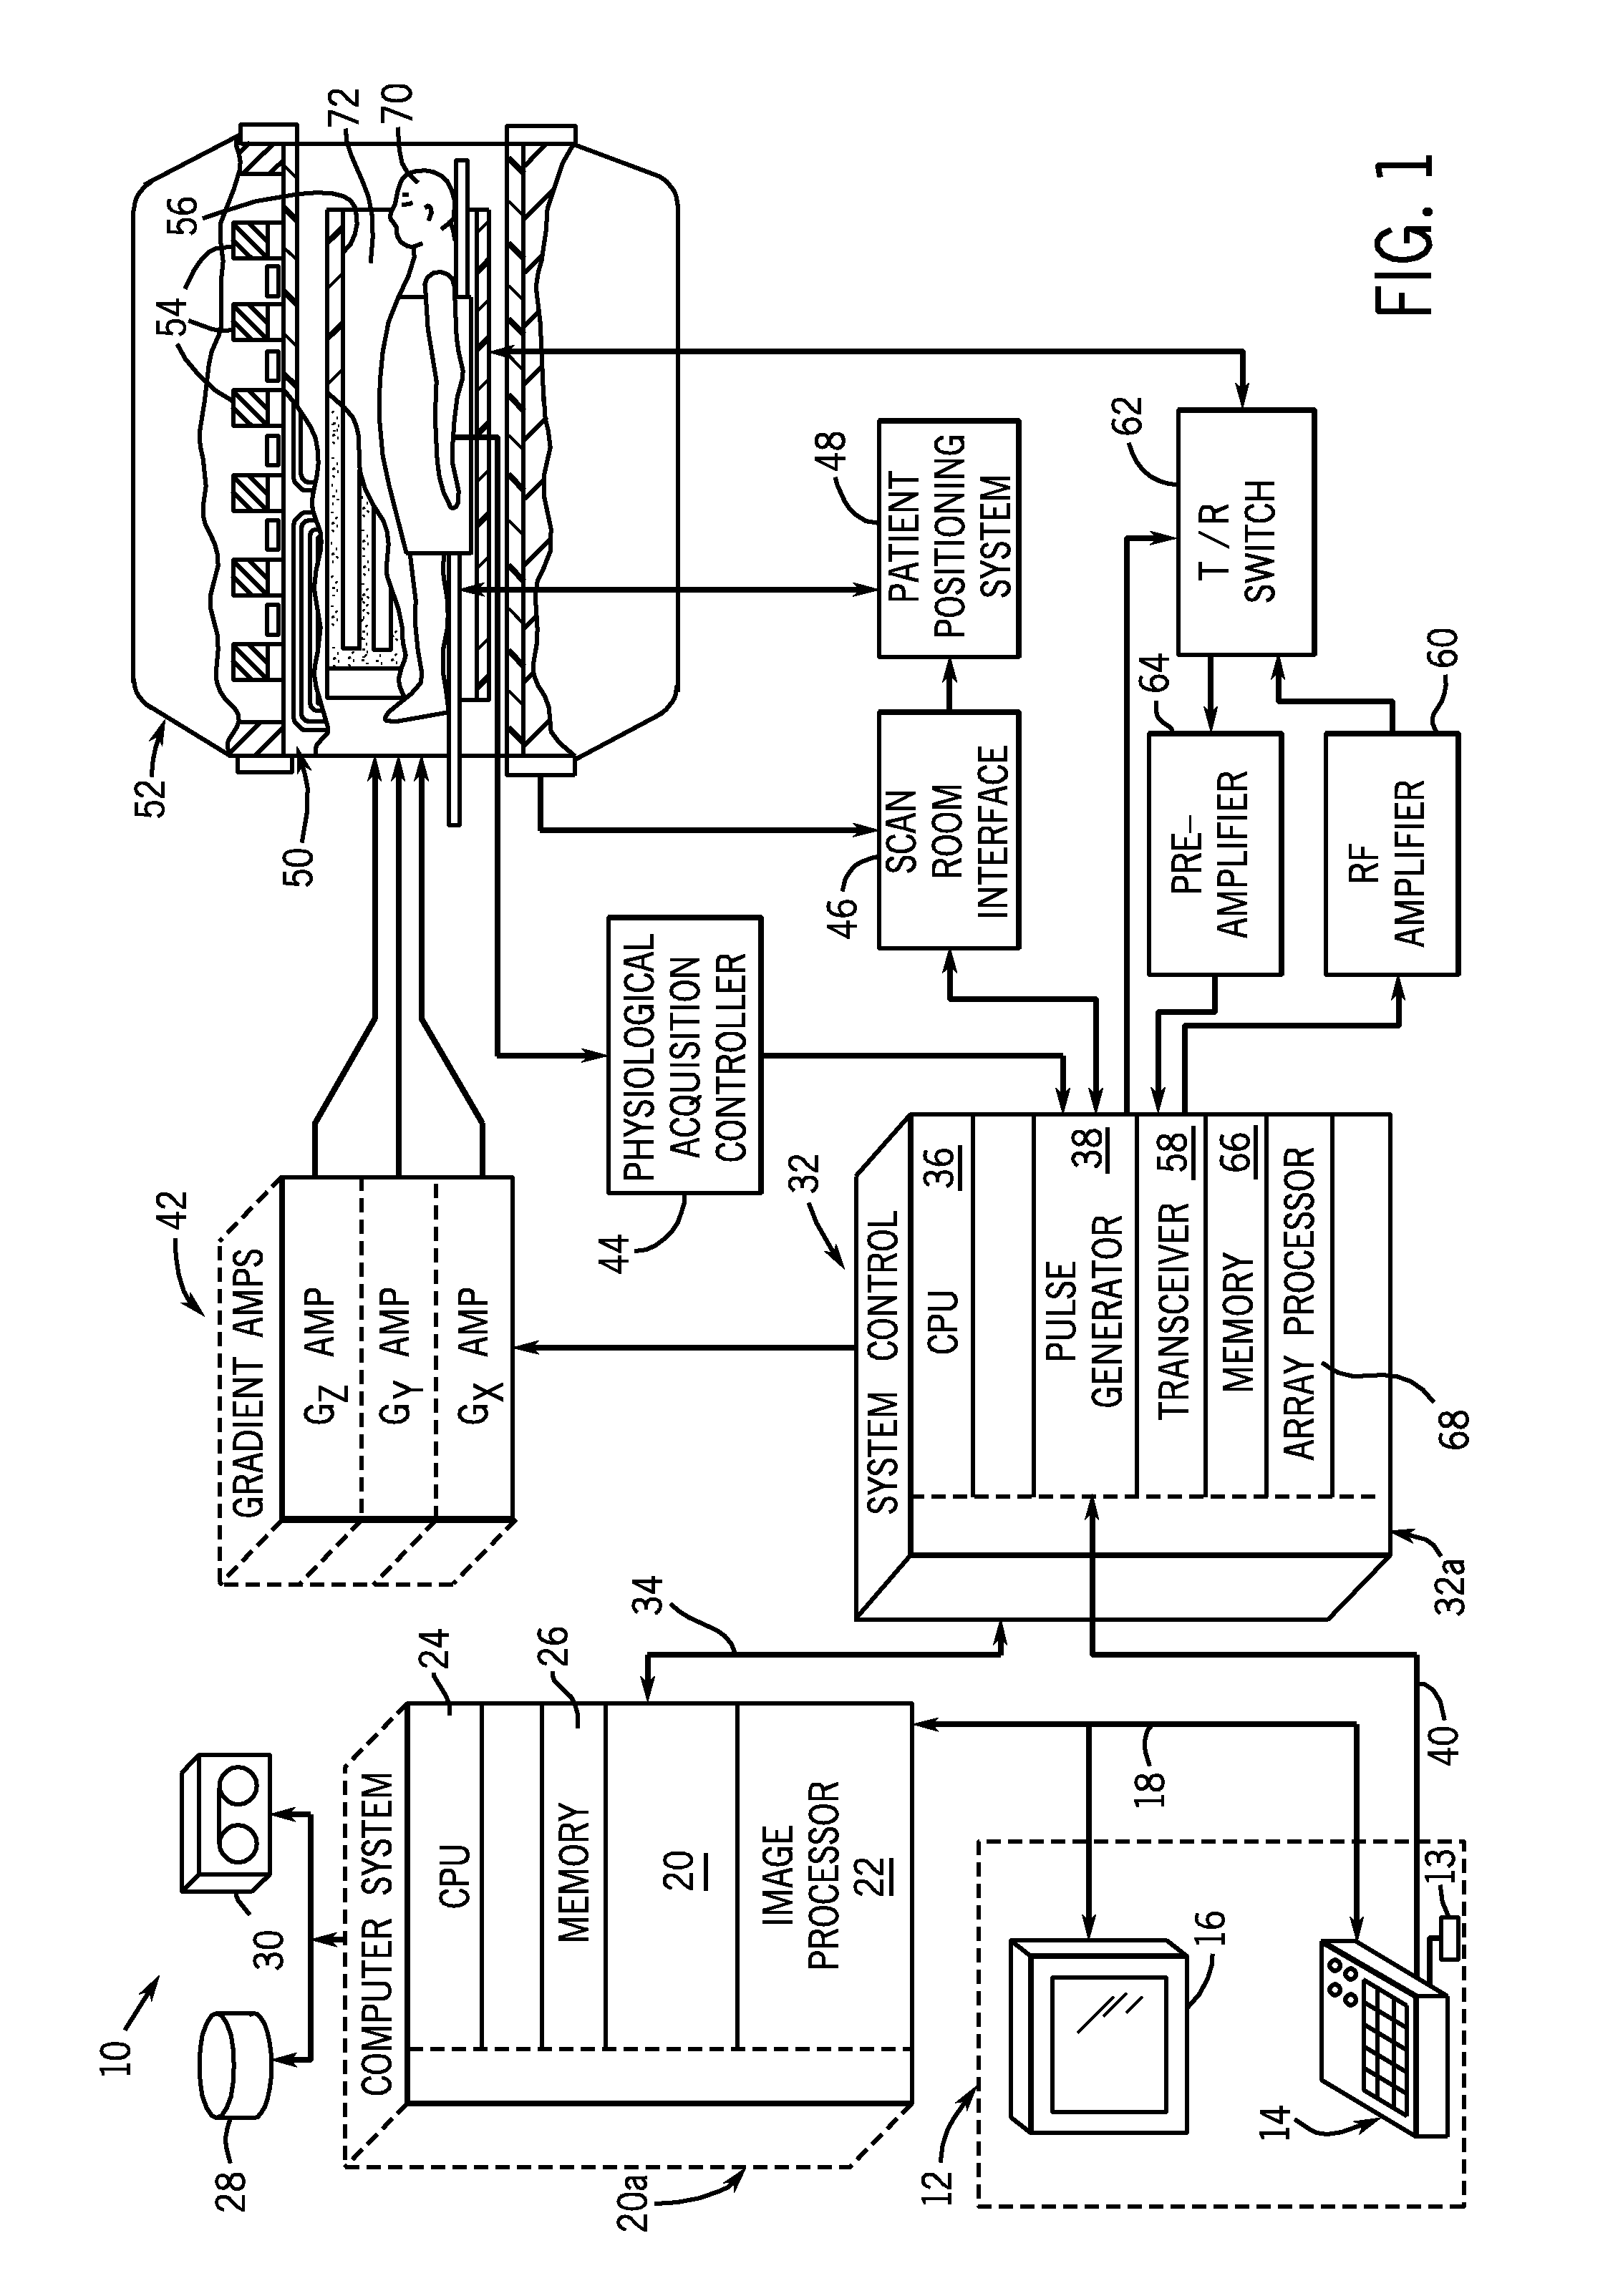 Method, apparatus and user interface for determining an arterial input function used for calculating hemodynamic parameters